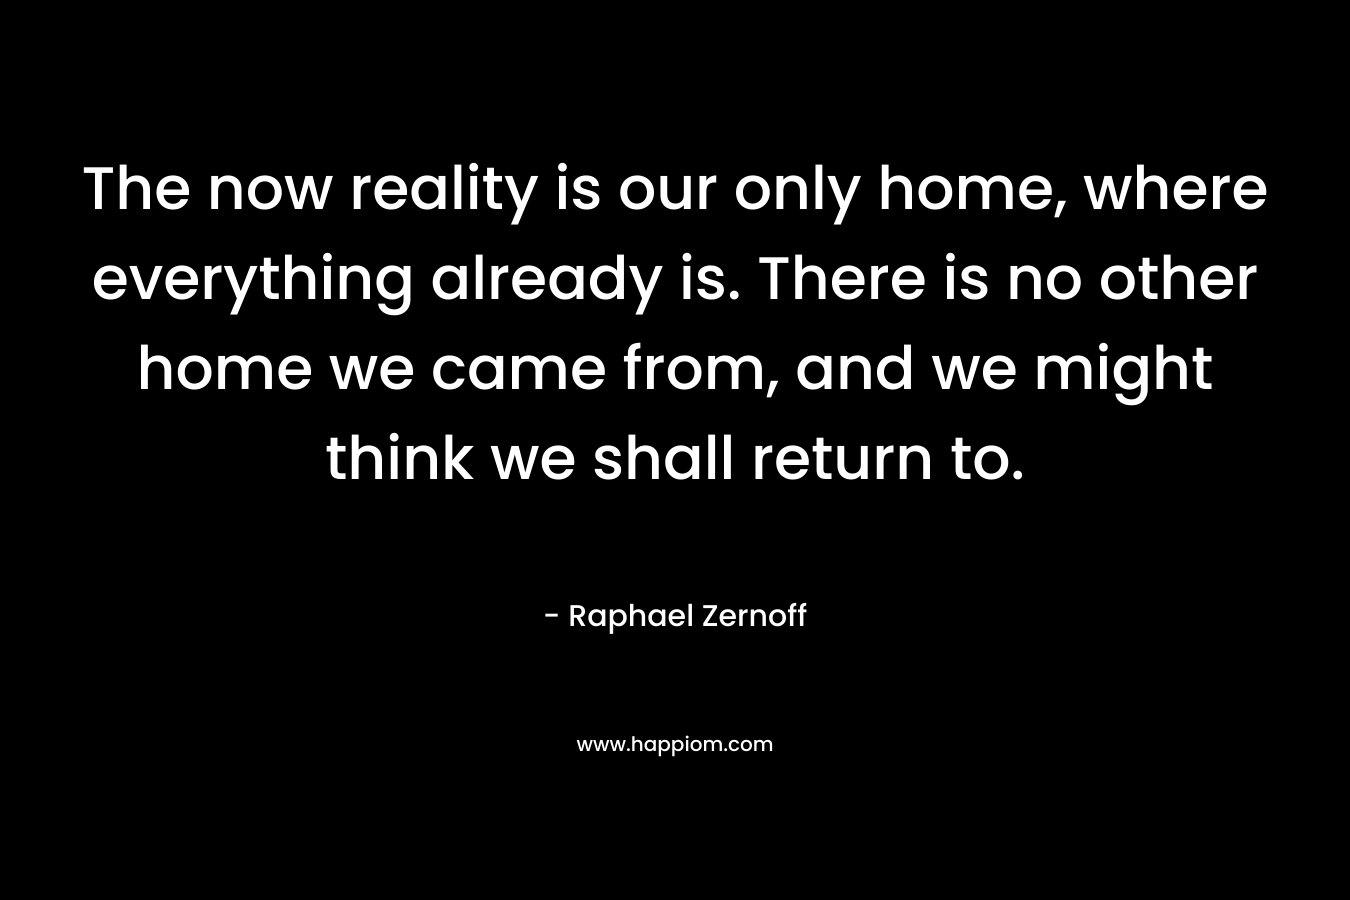 The now reality is our only home, where everything already is. There is no other home we came from, and we might think we shall return to.